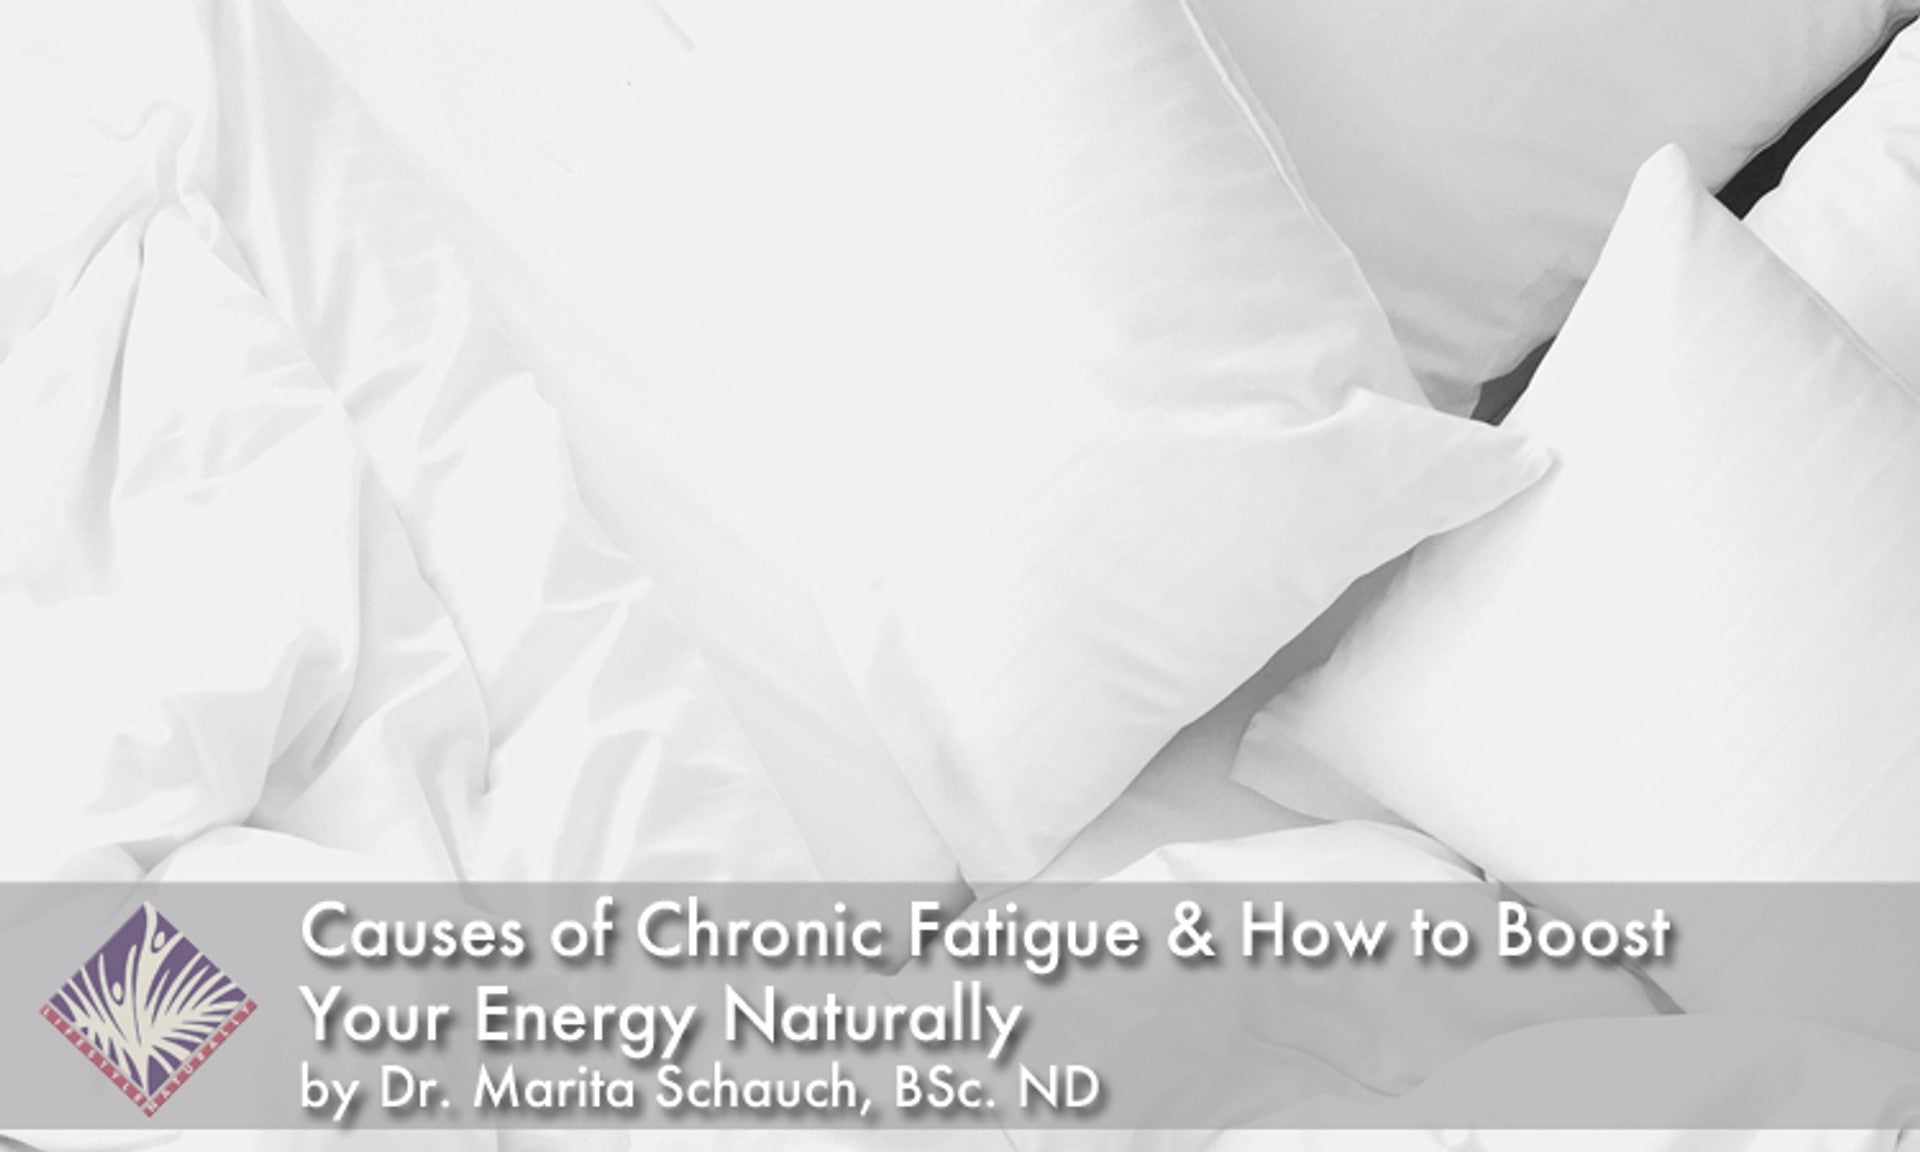 Causes of Chronic Fatigue and How to Boost Your Energy Naturally